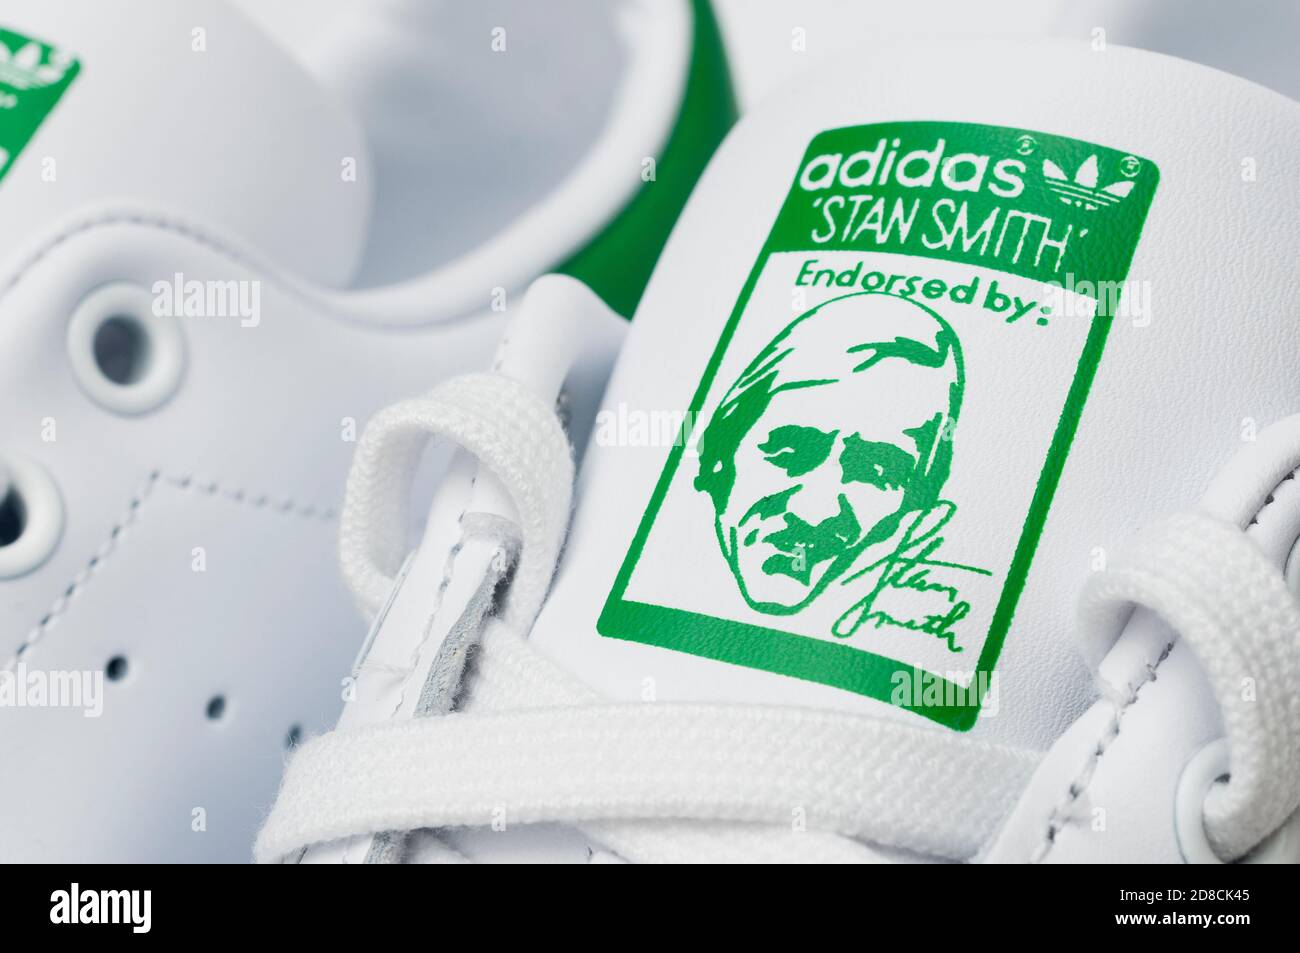 Carrara, Italy - October 28, 2020 - Adidas Stan Smith sneaker classic  (white and green) front logo detail Stock Photo - Alamy